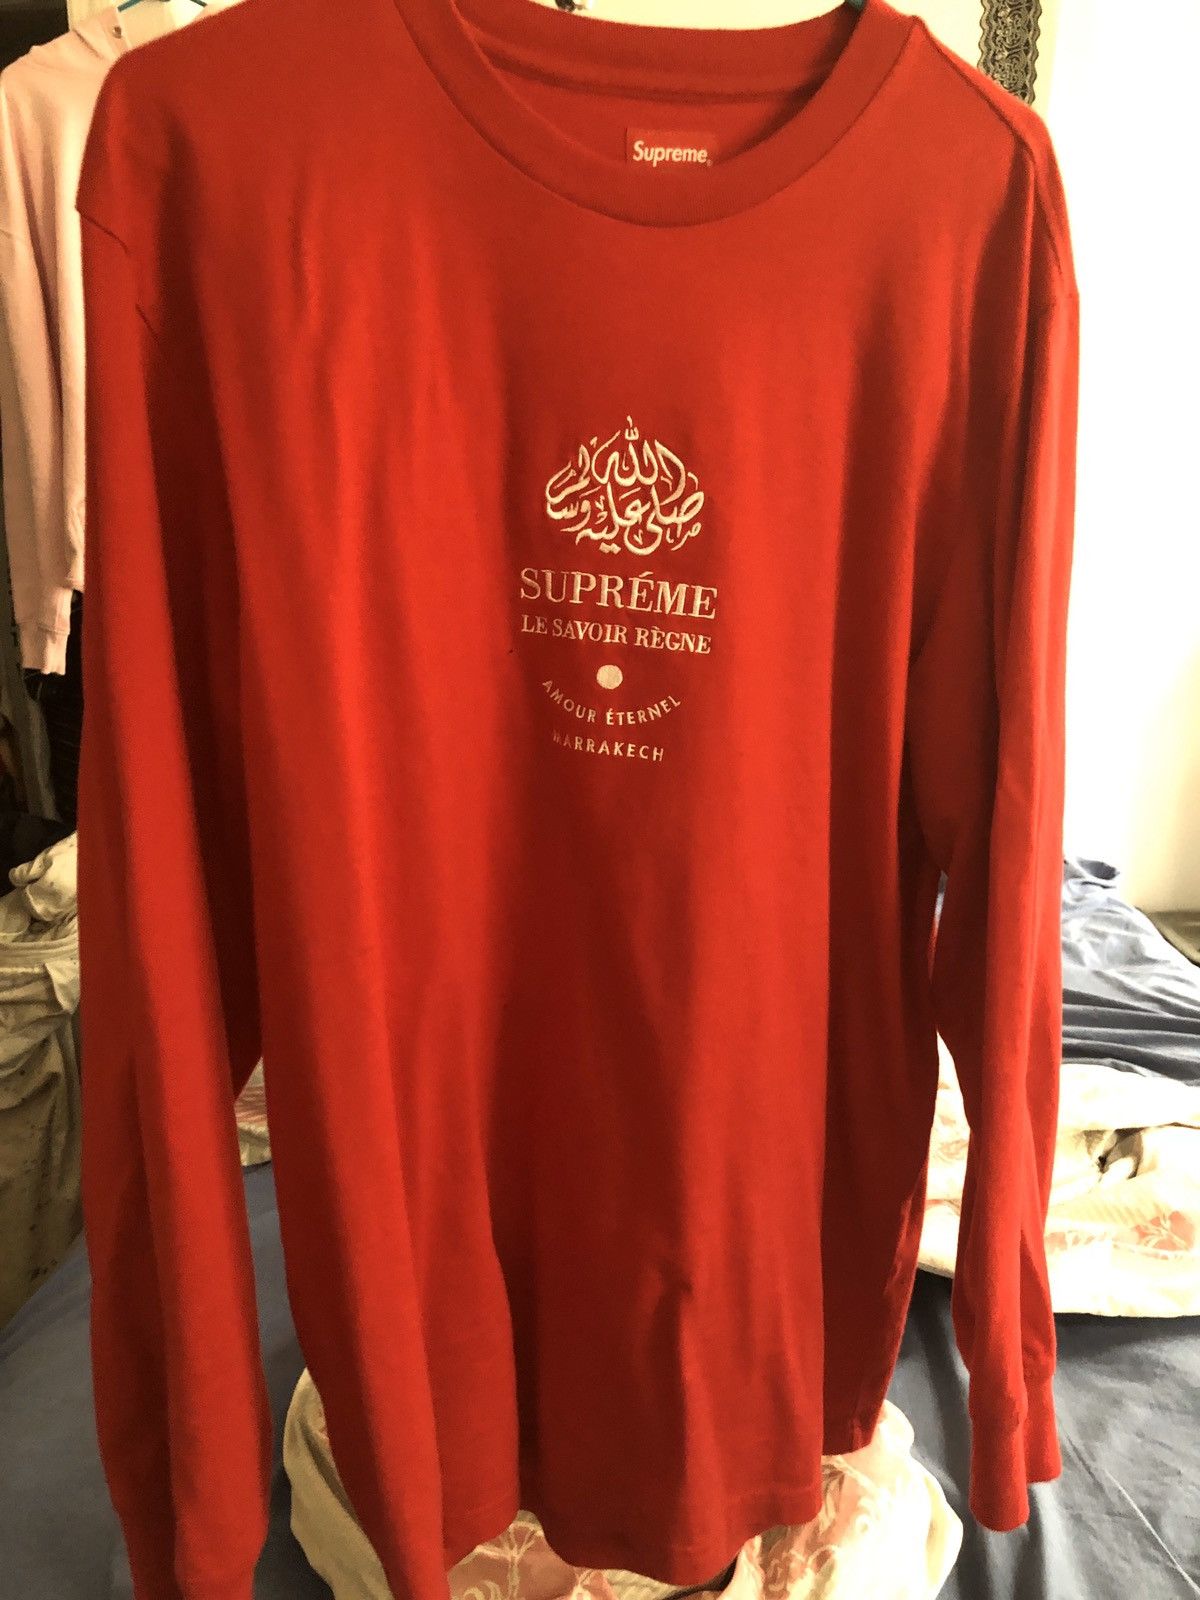 Supreme Supreme Marrakech L/S Top Red Long Sleeve | Grailed